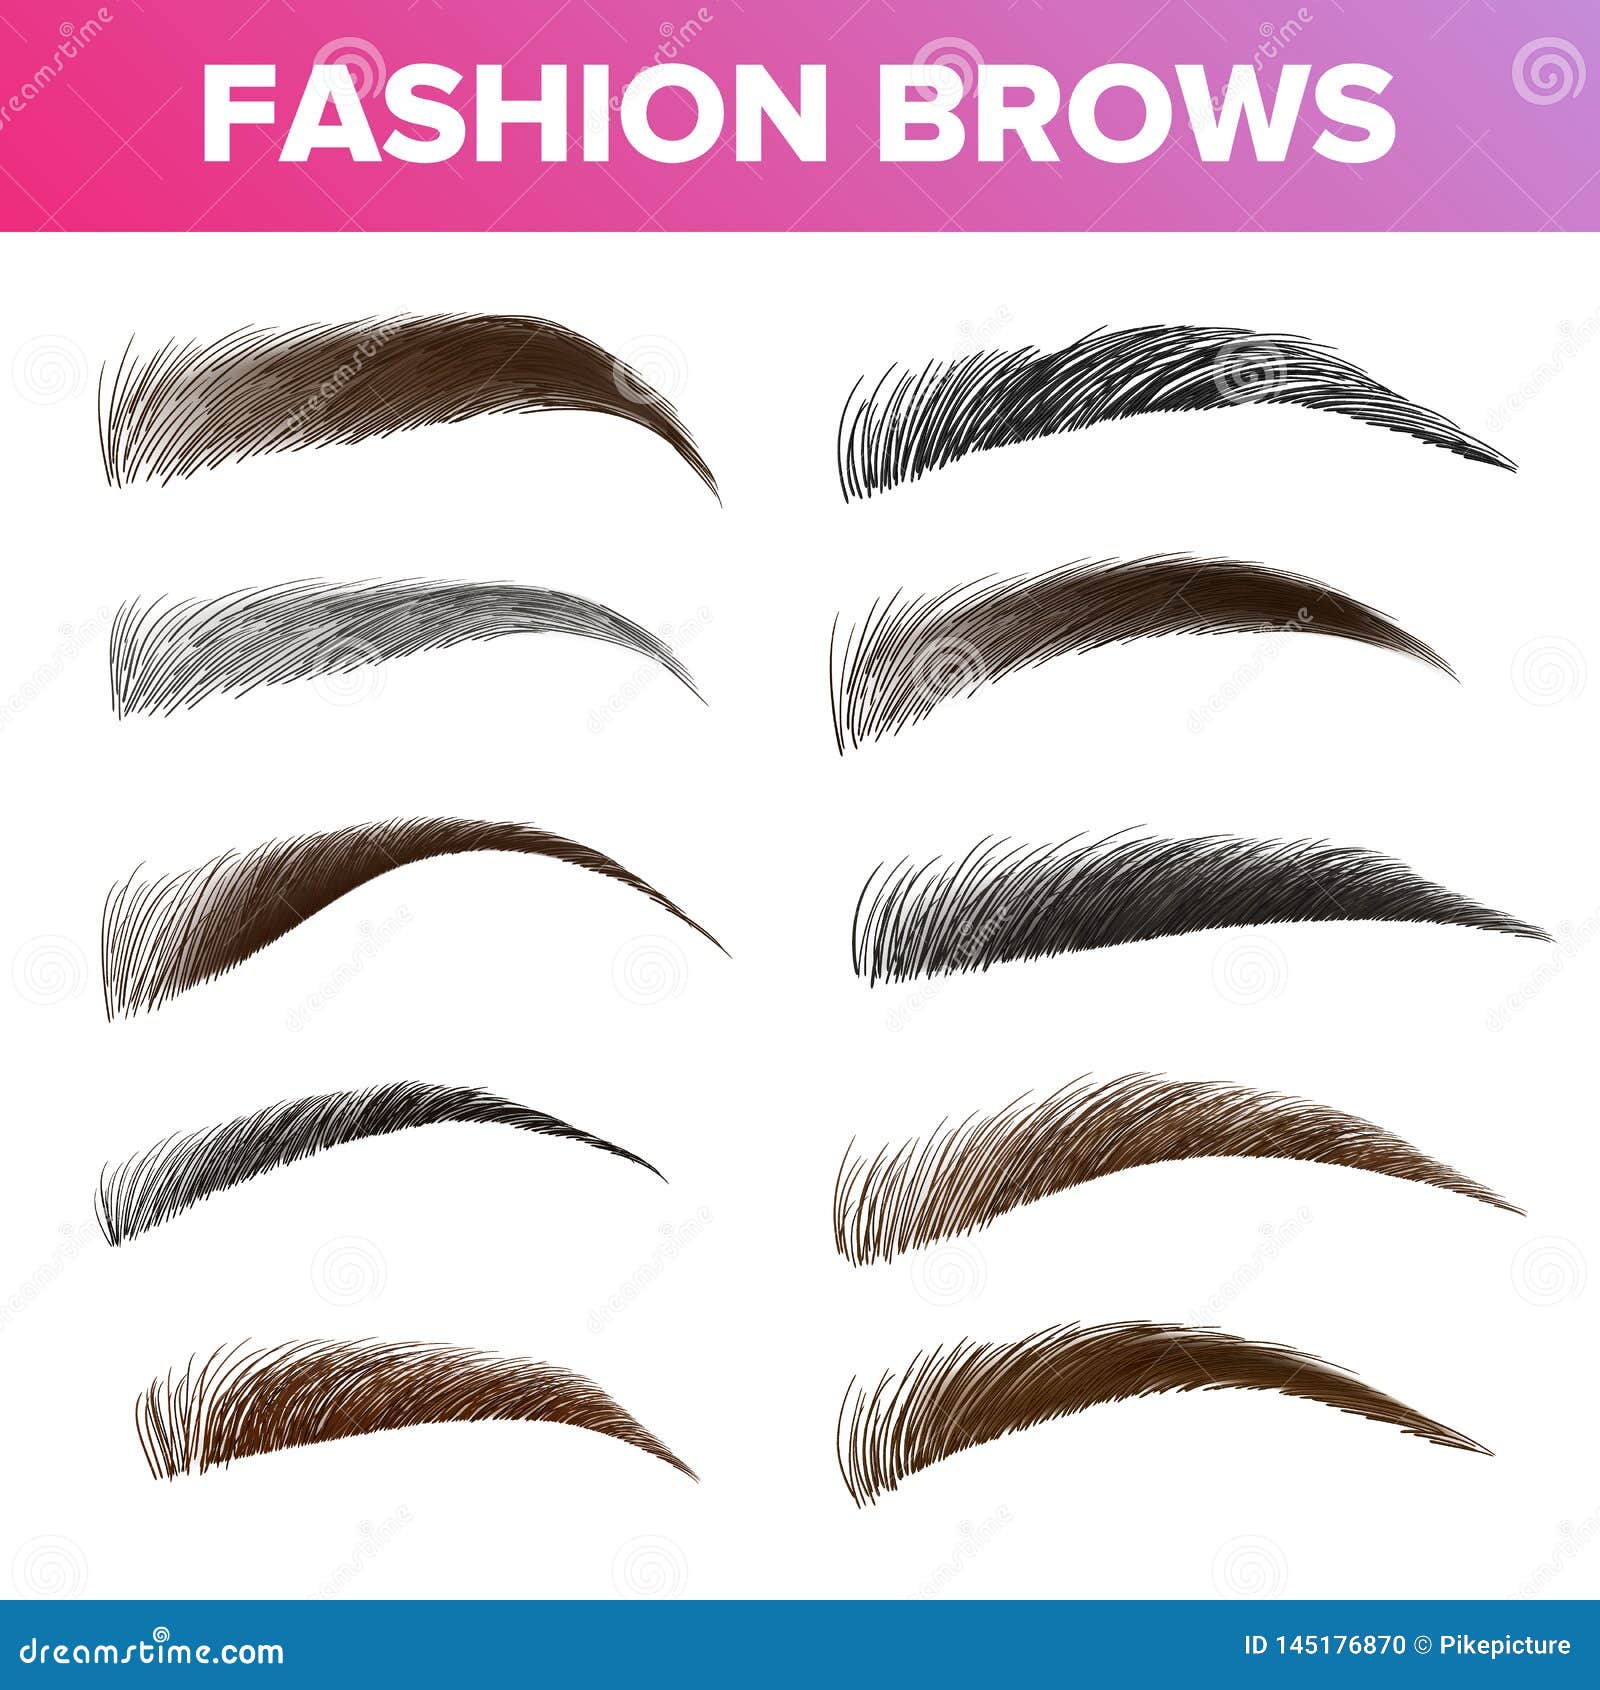 fashion brows various s and types  set